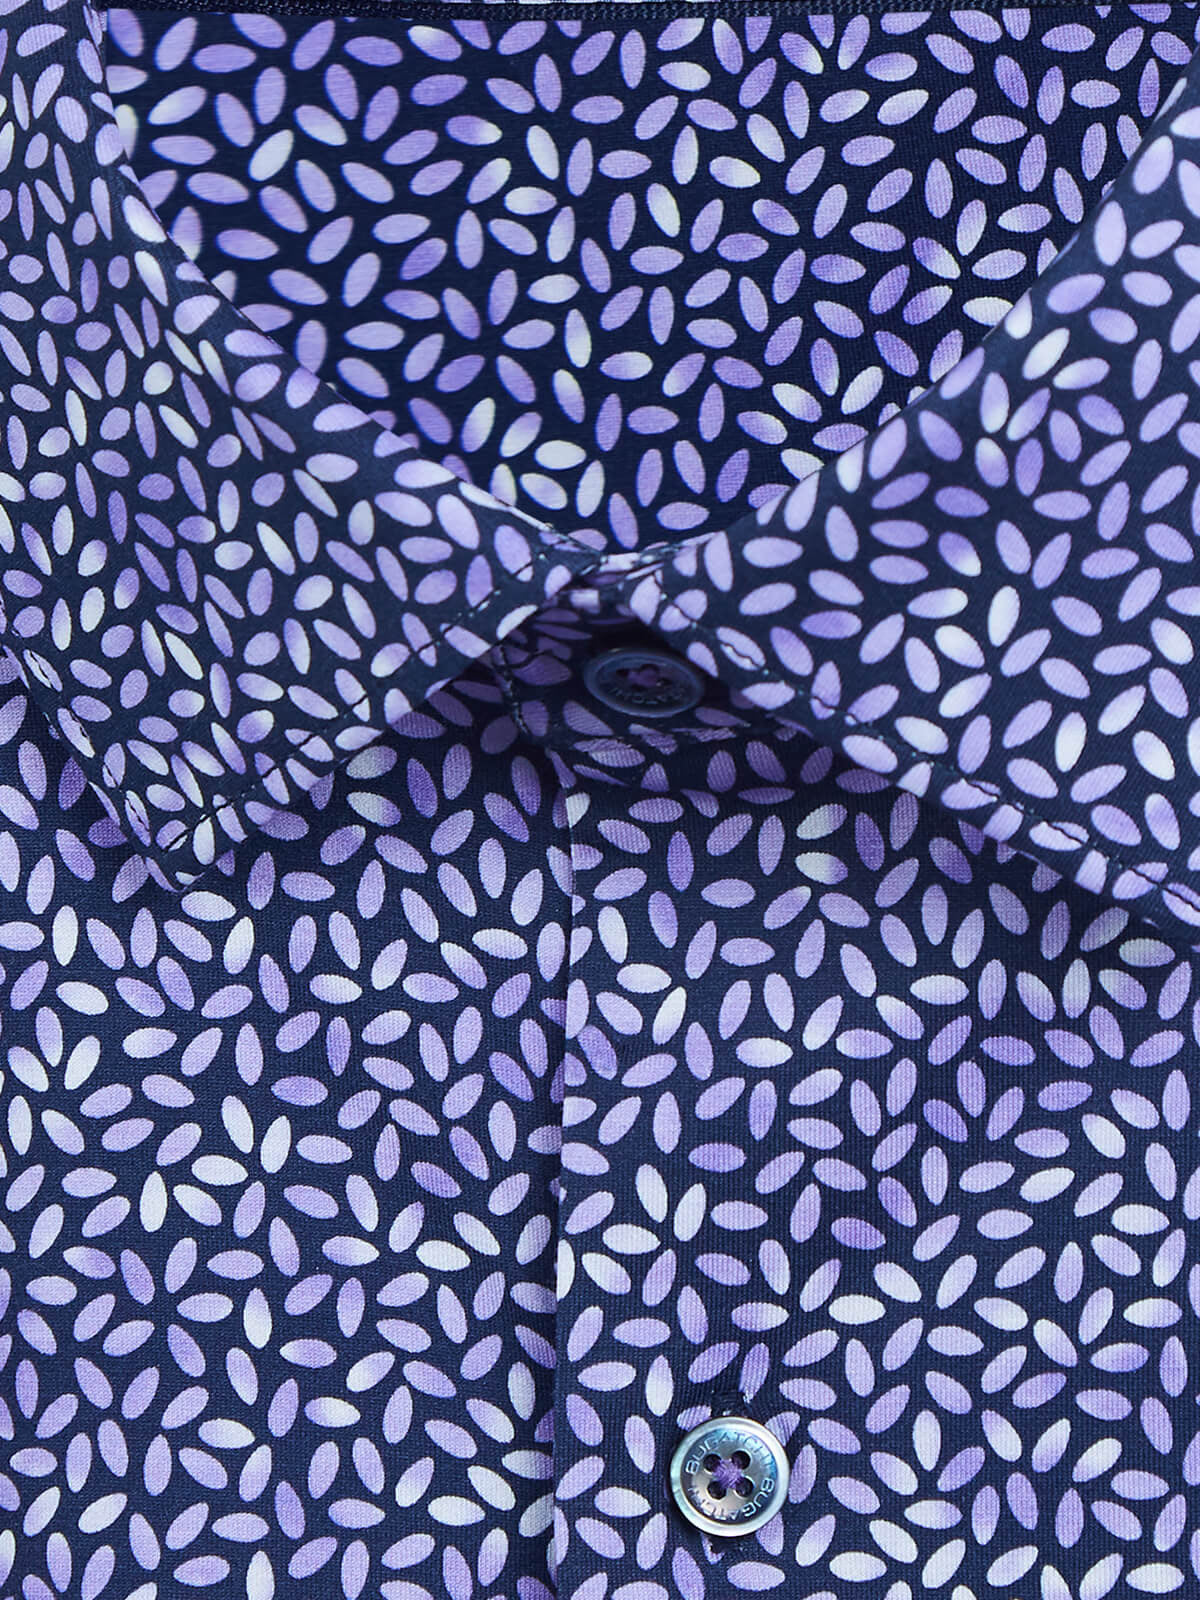 OOOHCOTTON SMALL LEAF PRINT SHIRT - ORCHID